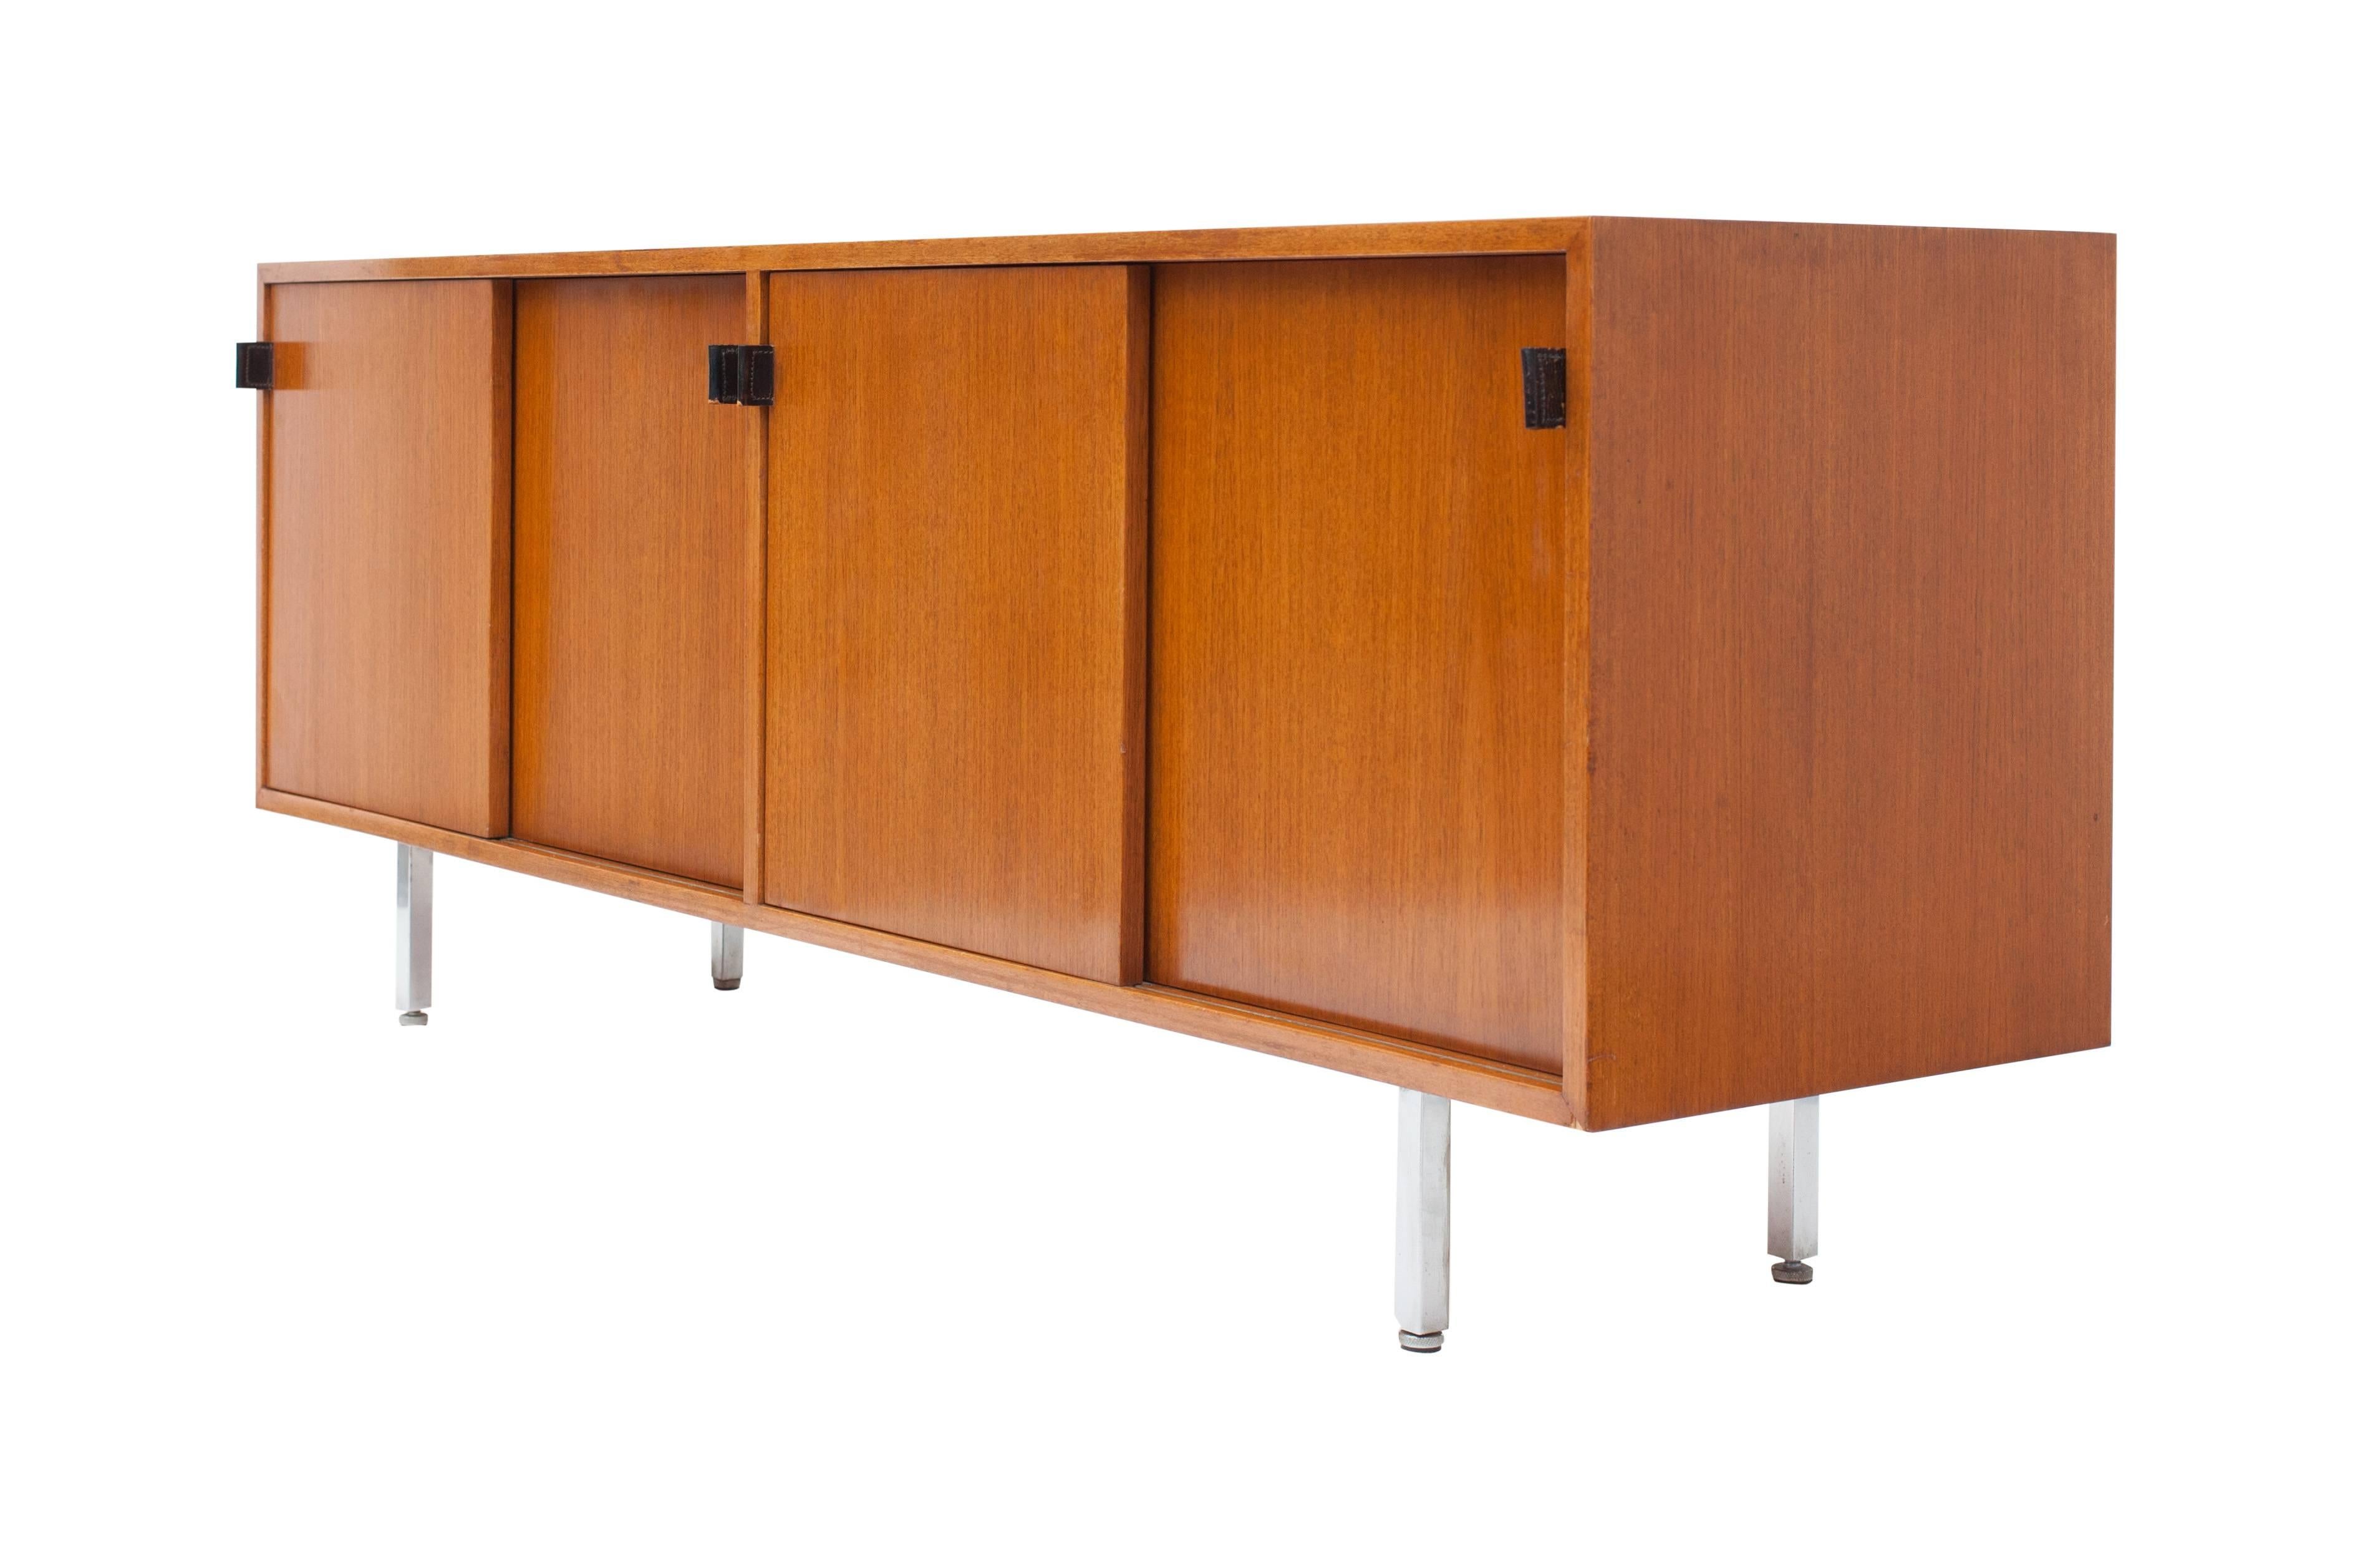 Florence Knoll Credenza in Teak, Manufactured by De Coene, 1950s 1